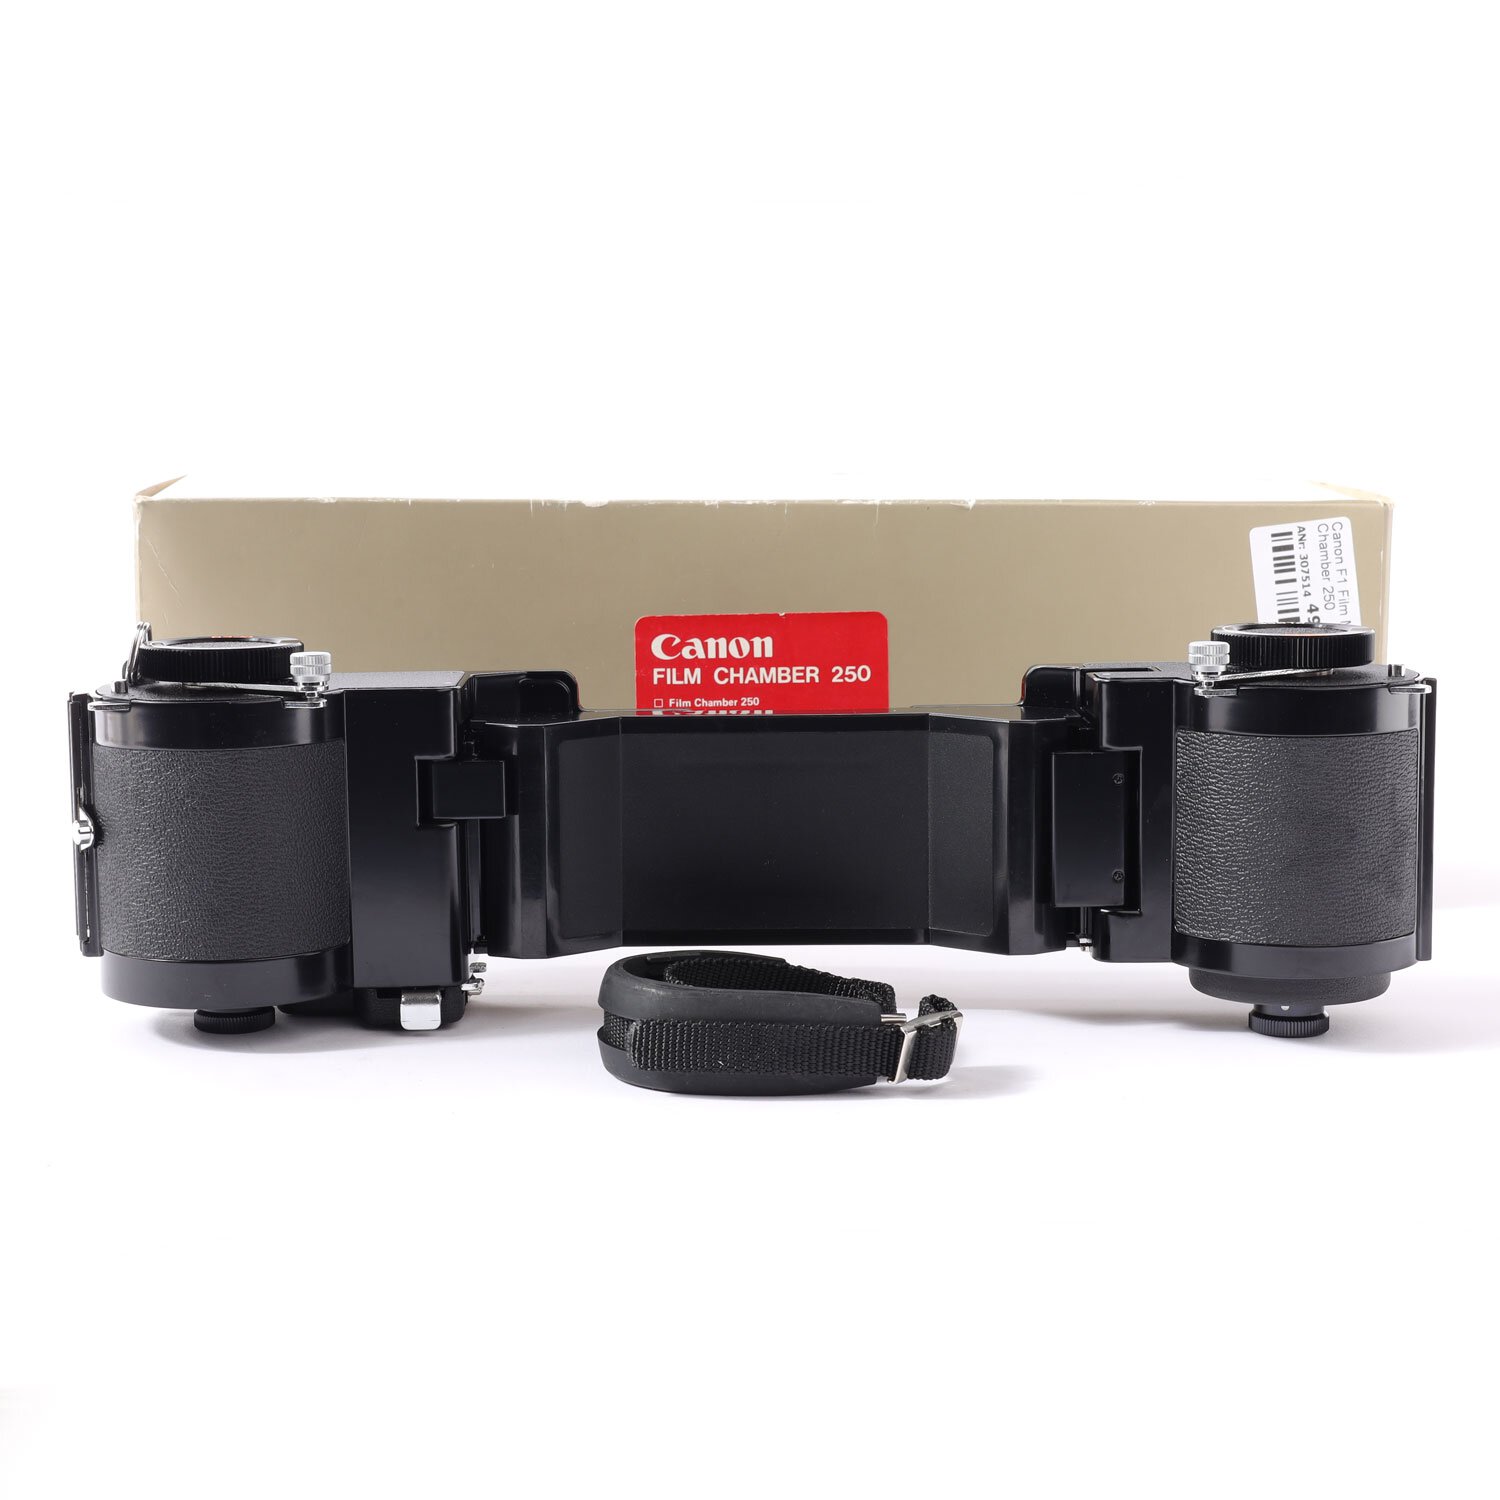 Canon F1 Film Magasin Chamber 250